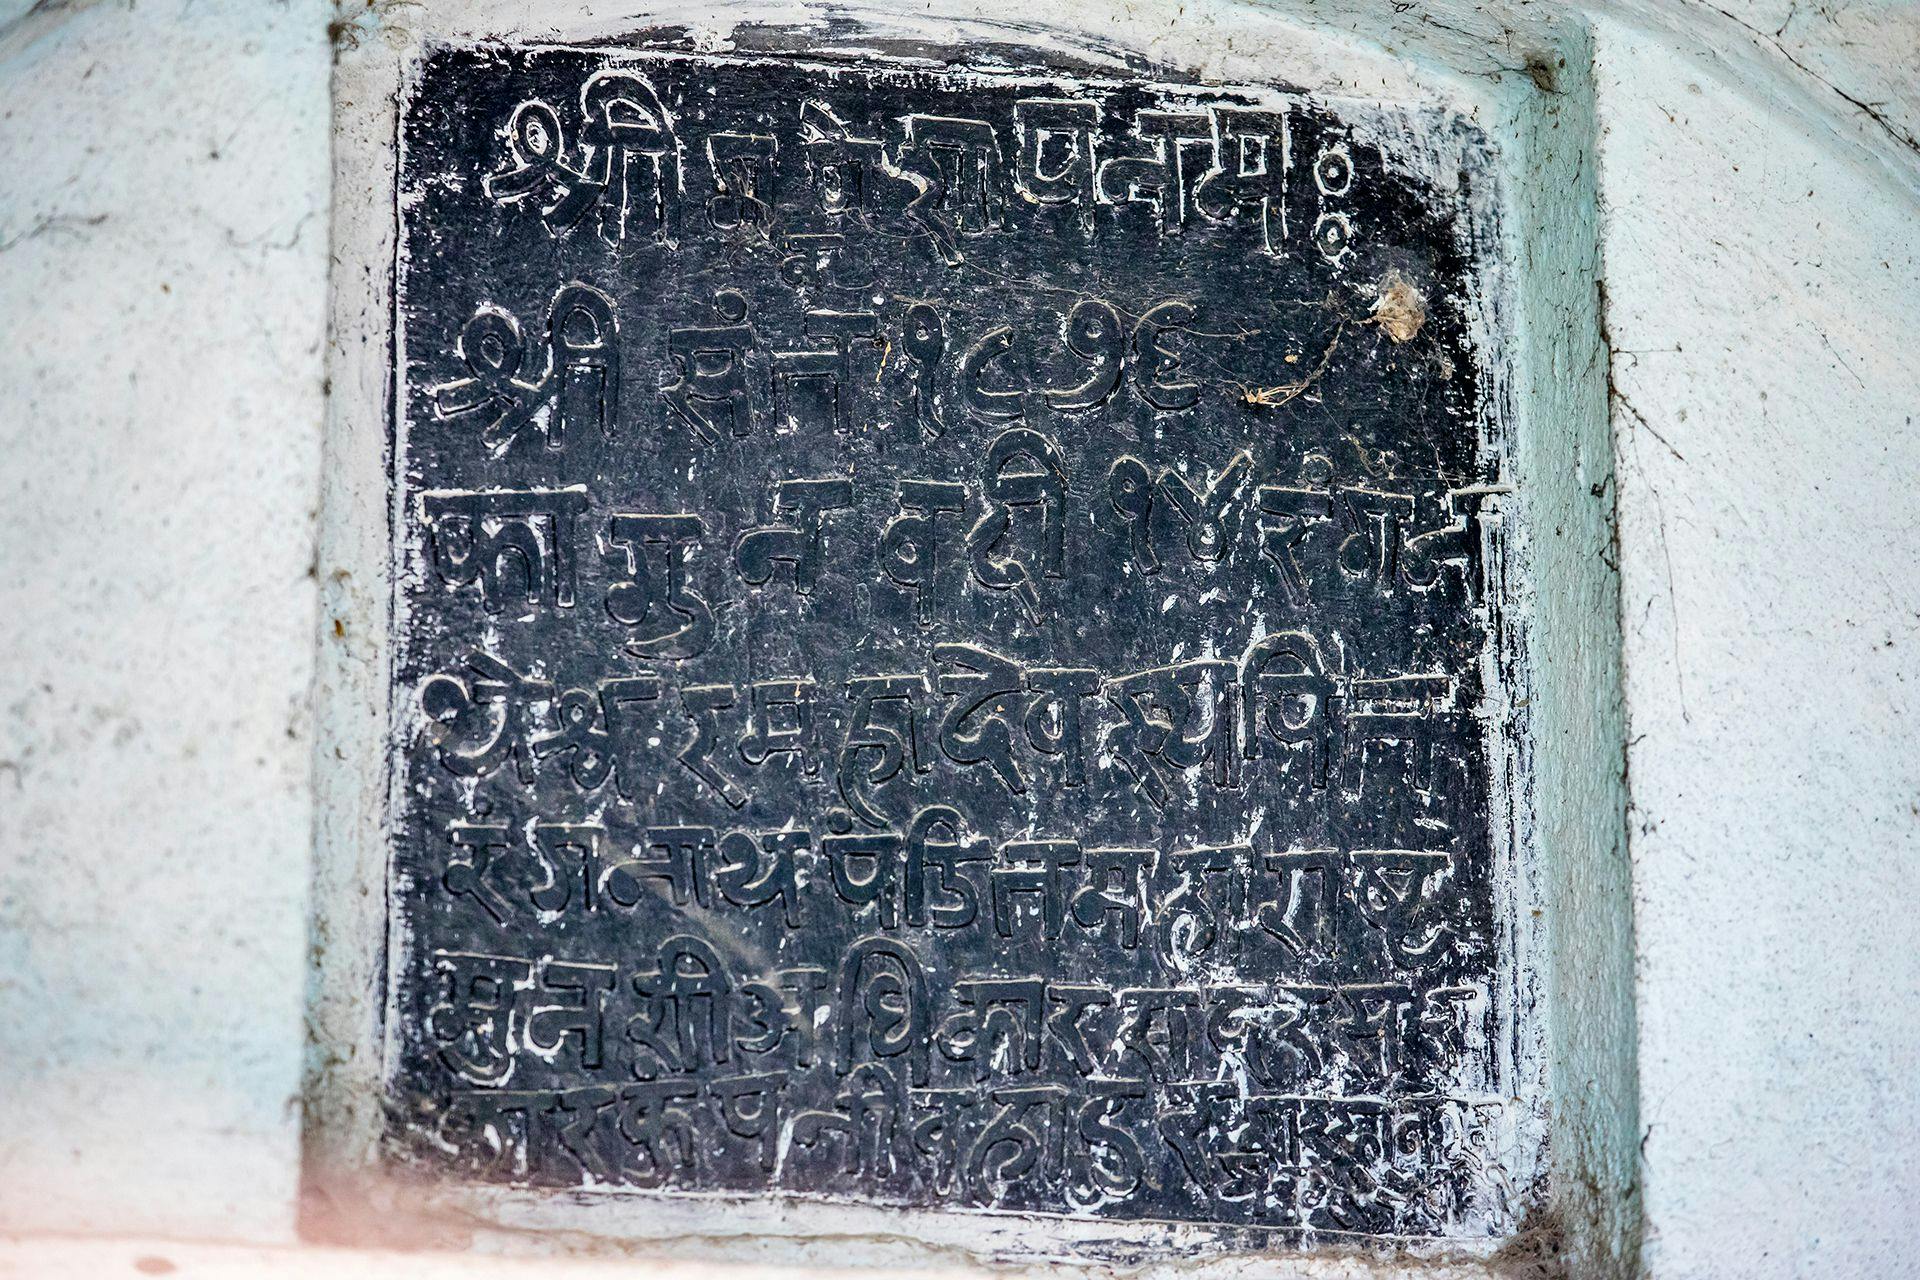 The Marathi inscription in the temple